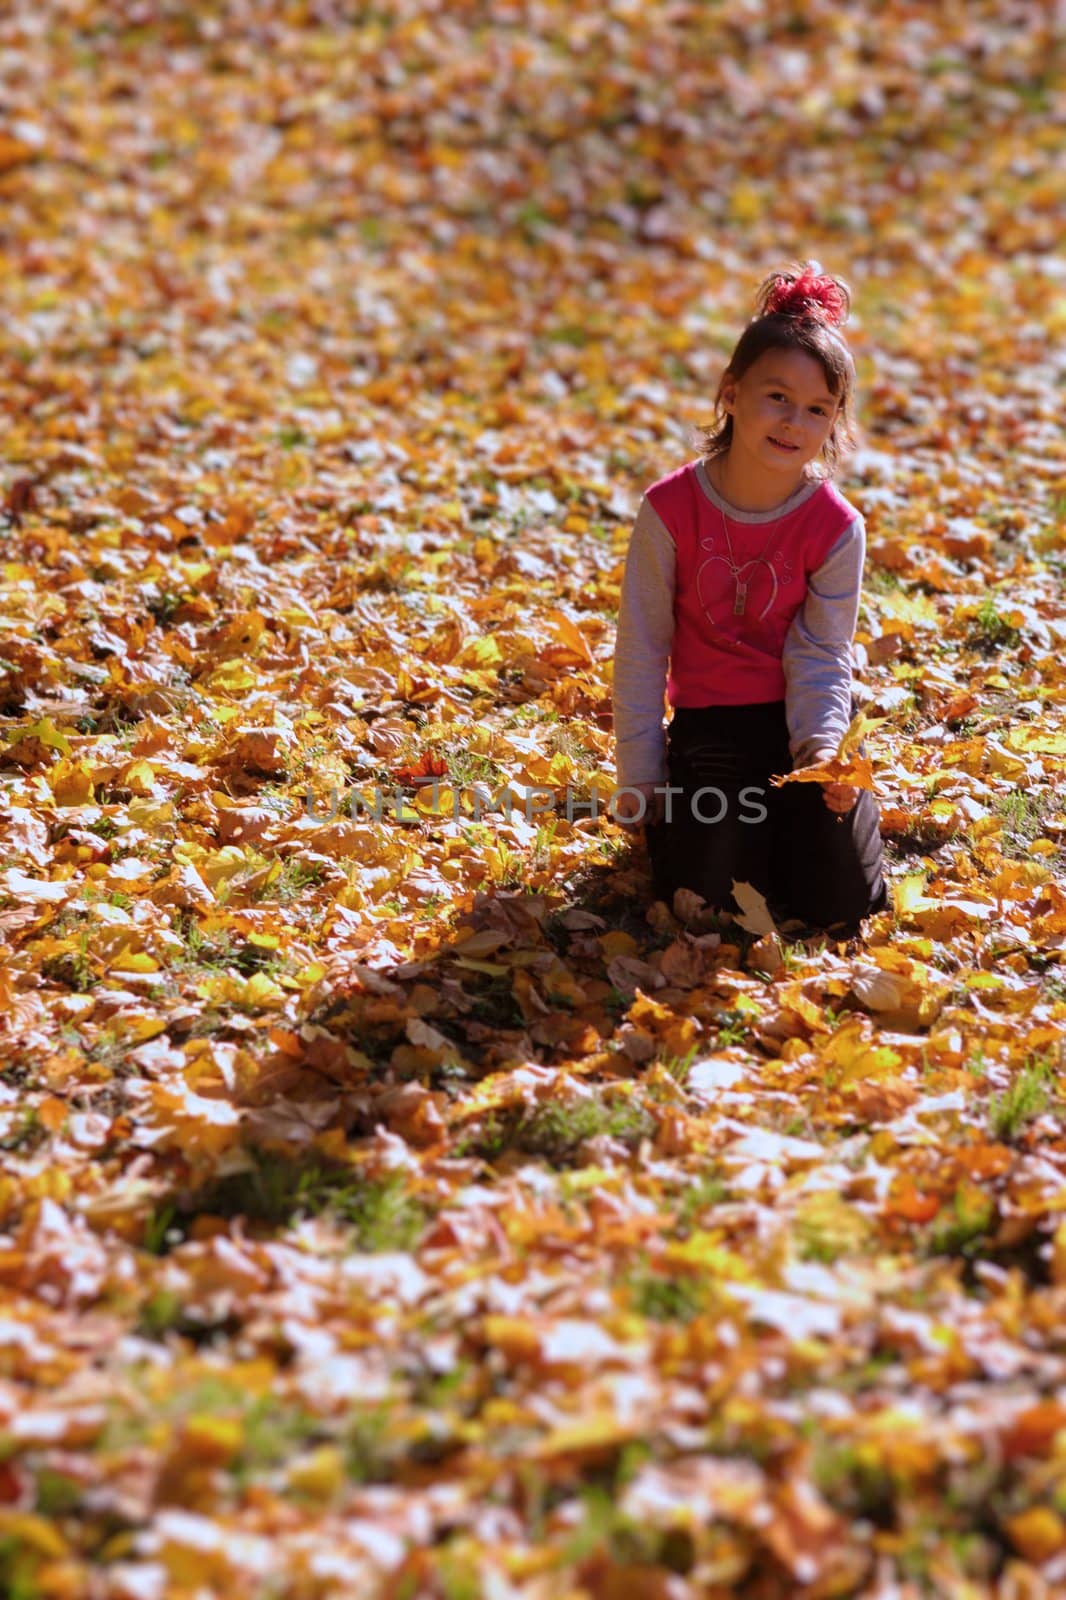 Calm smiling little girl sitting on bright colorful autumn leaves.